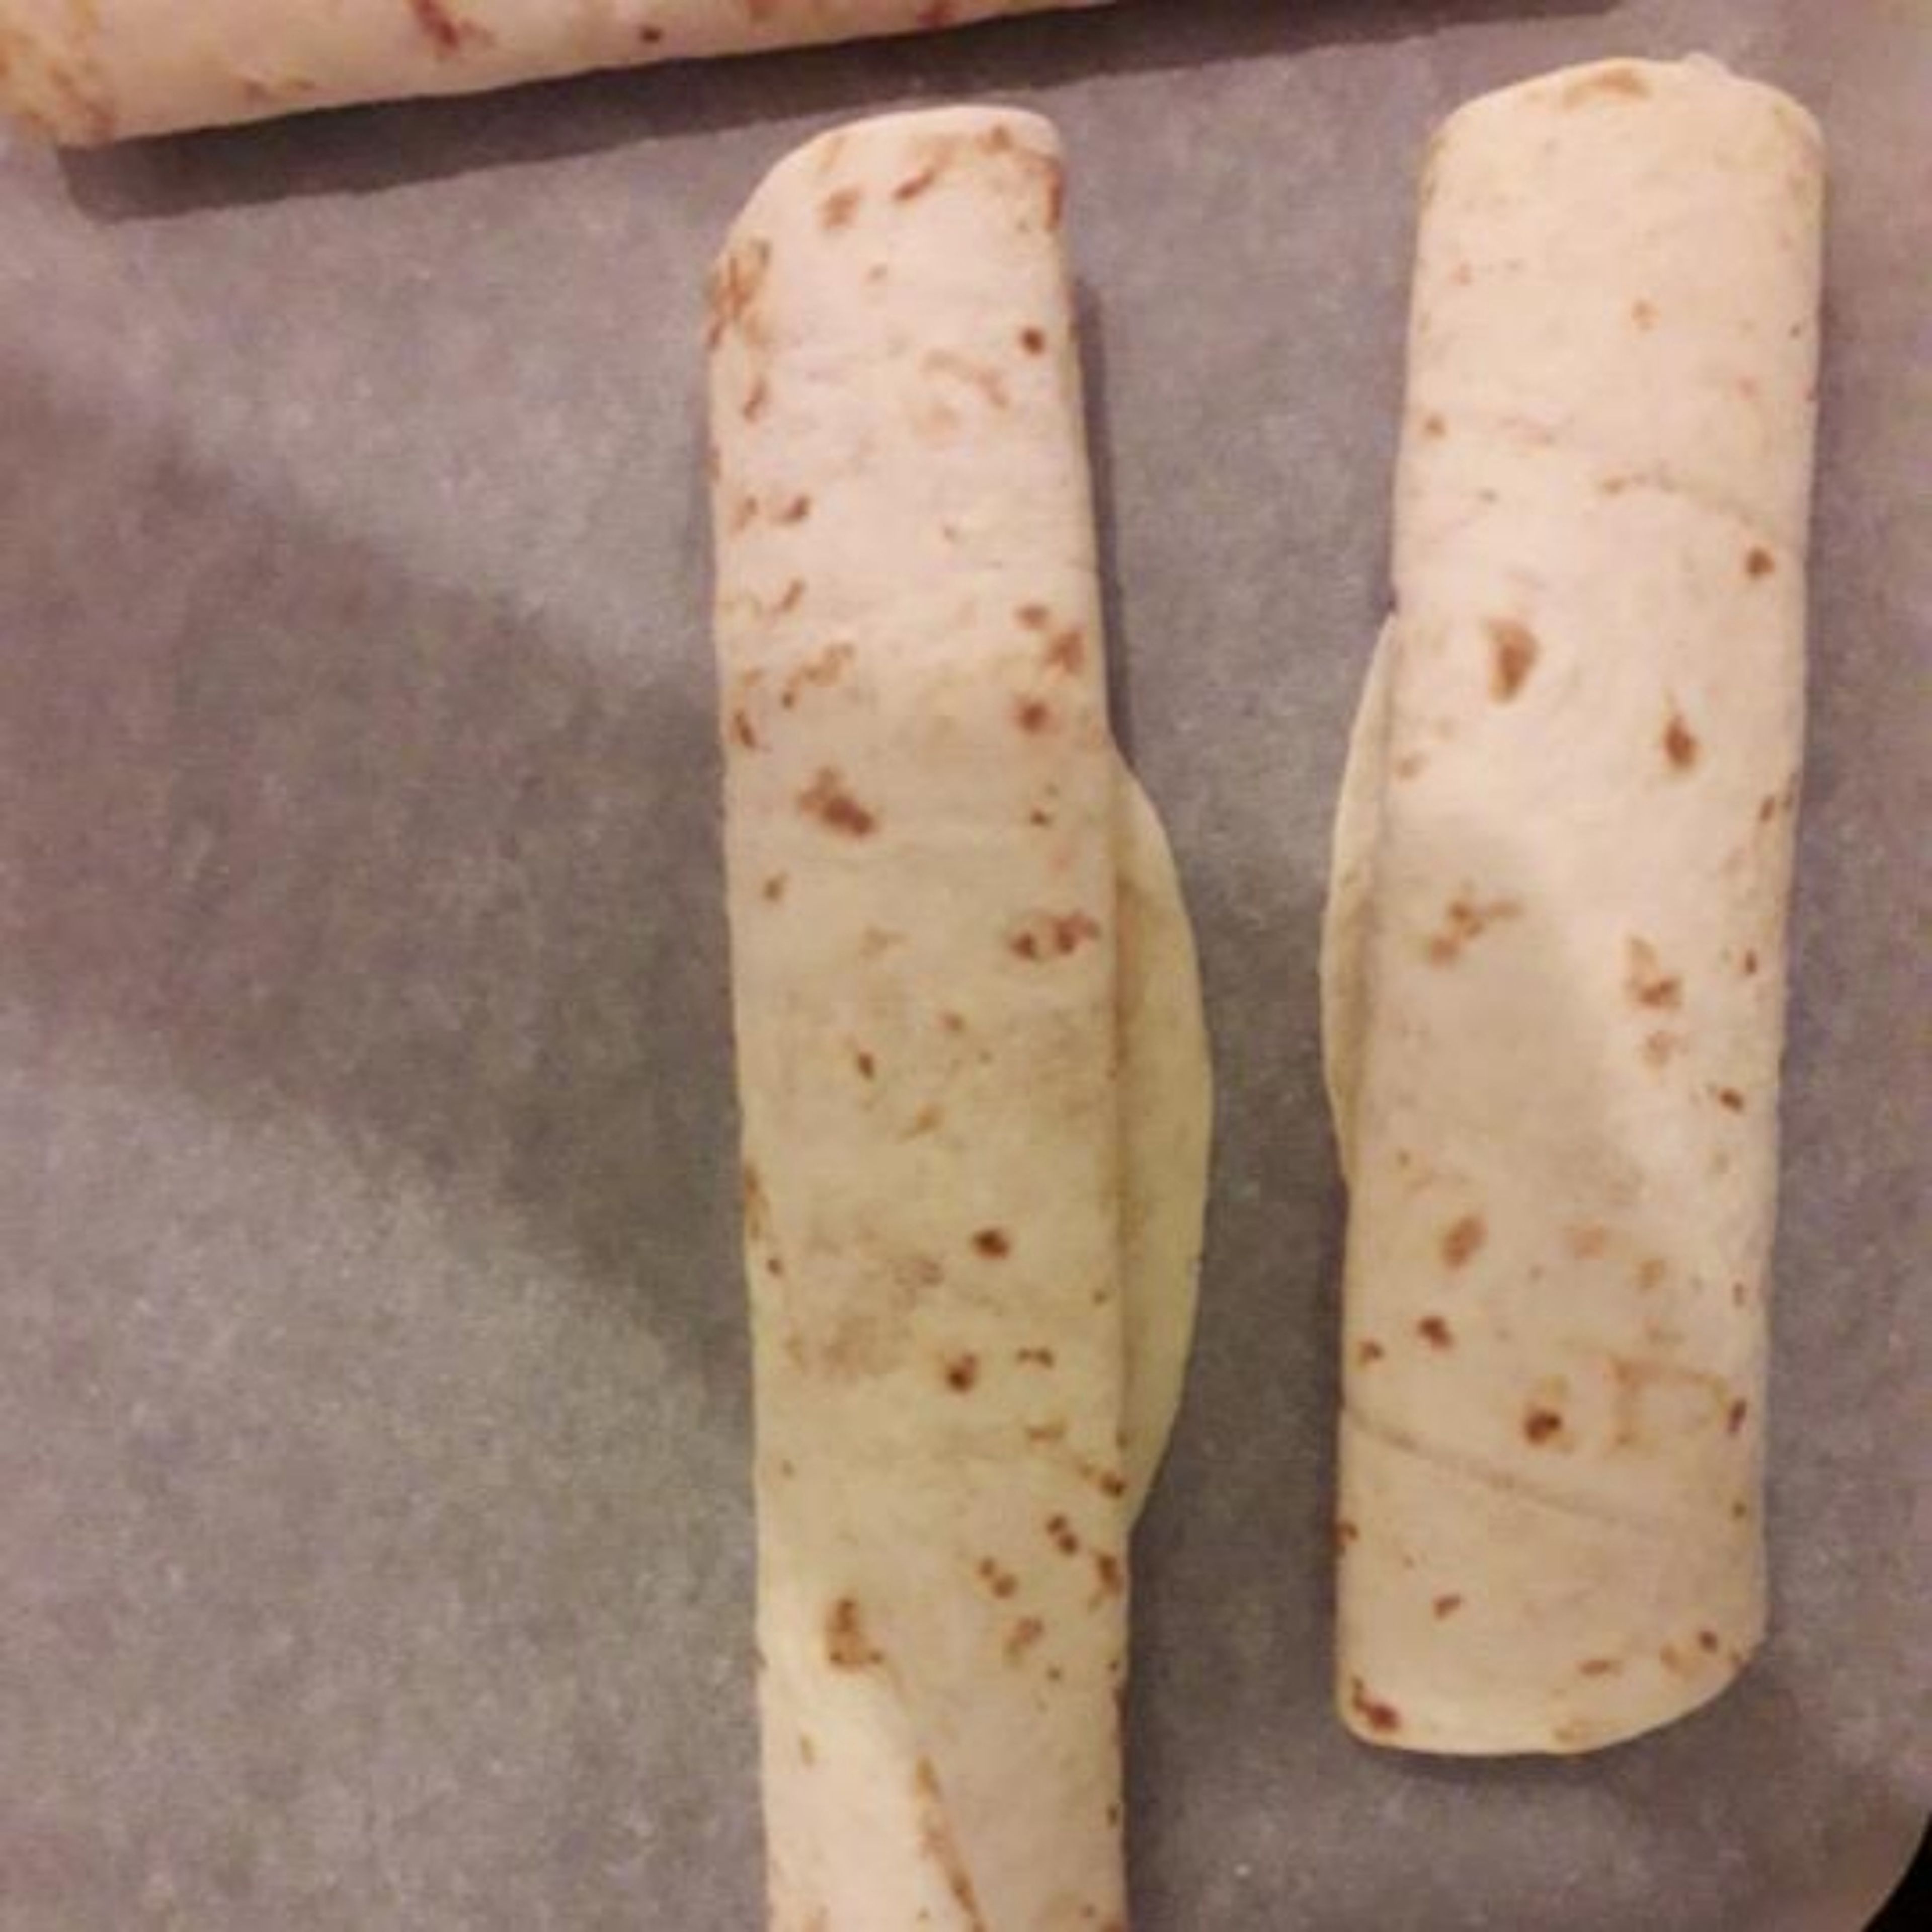 Once you put all your toppings on the tortilla, carefully role it and after it, lightly press it so it doesn't unroll on the tray. Wait until the oven is ready and them put them in.